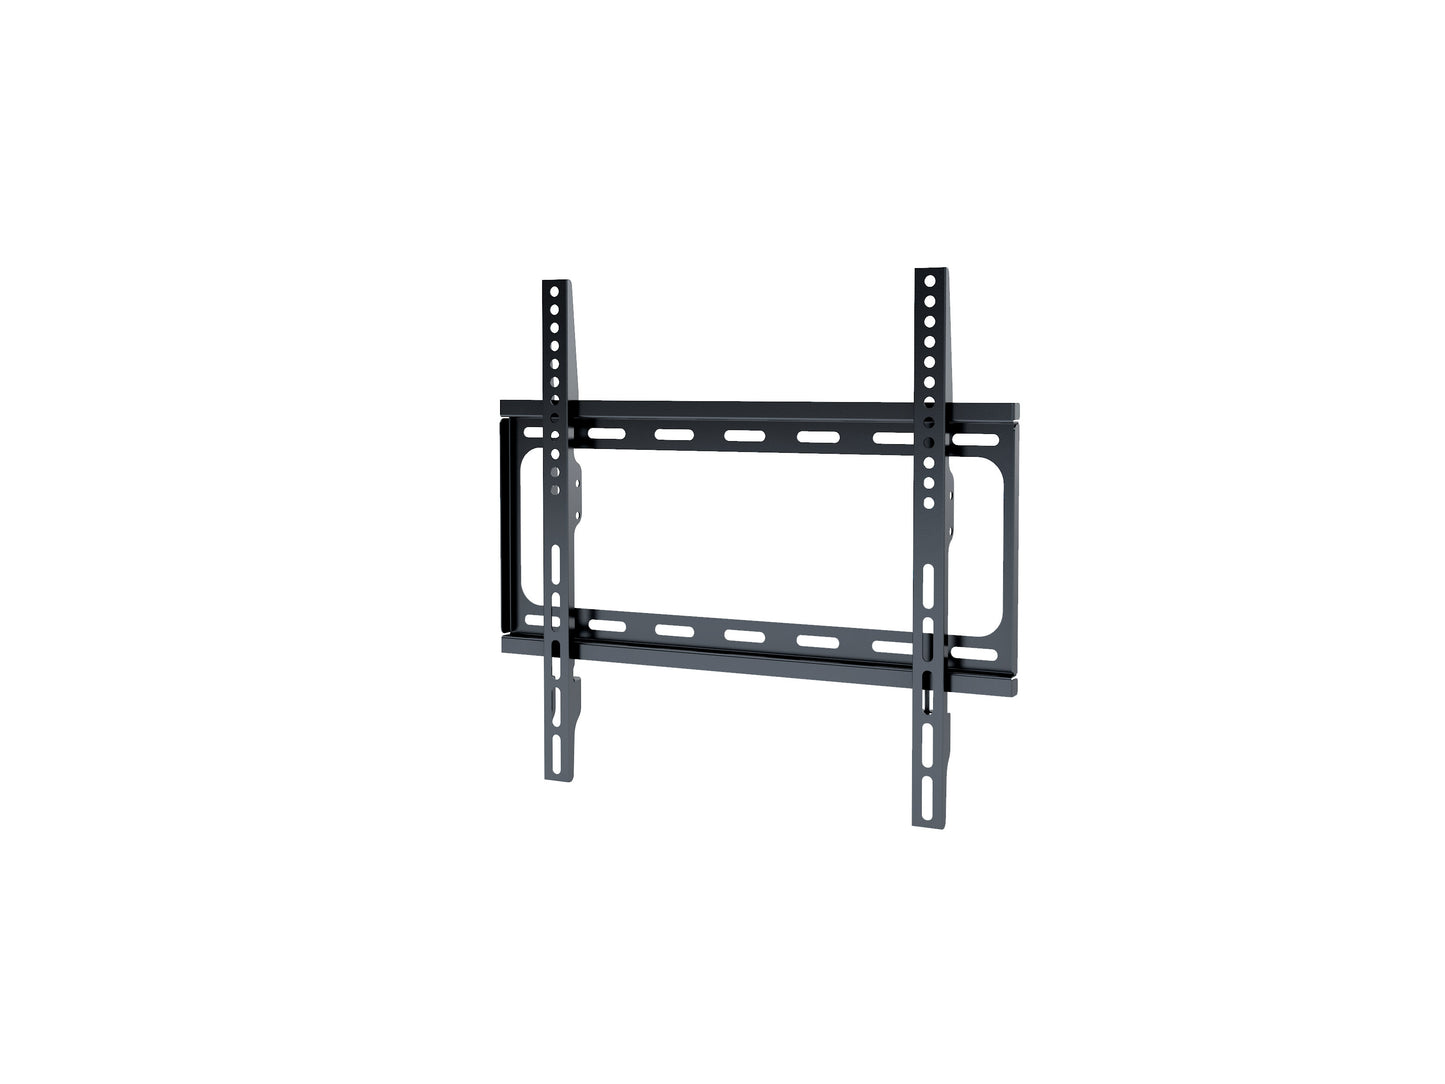 Fixed TV Wall Mount for 26" - 65" TVs